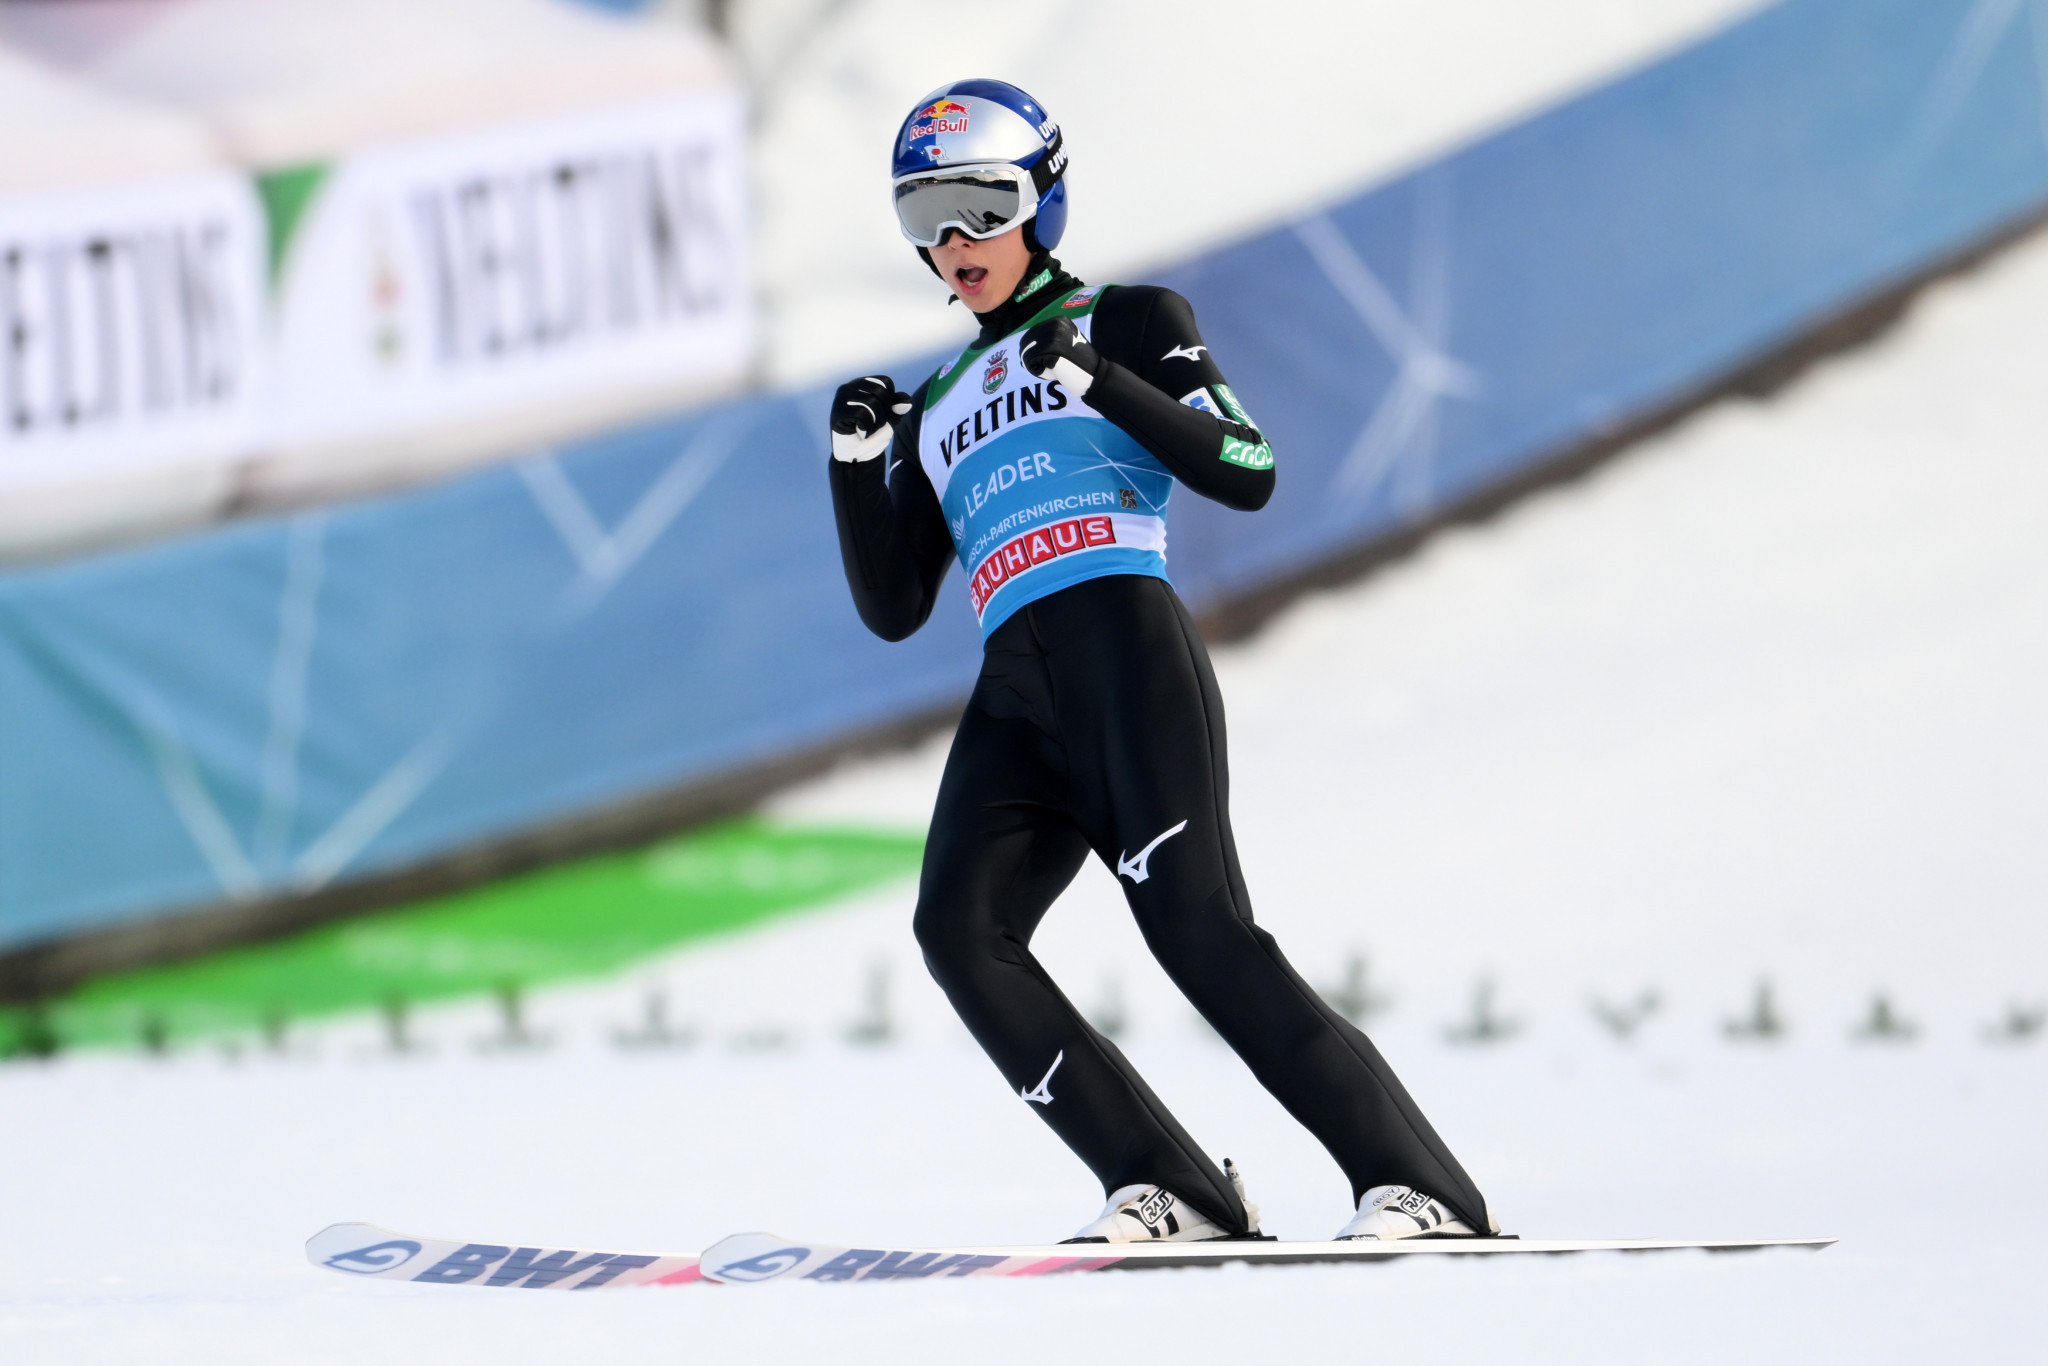 Kobayashi overtakes Geiger in FIS Ski Jumping World Cup standings